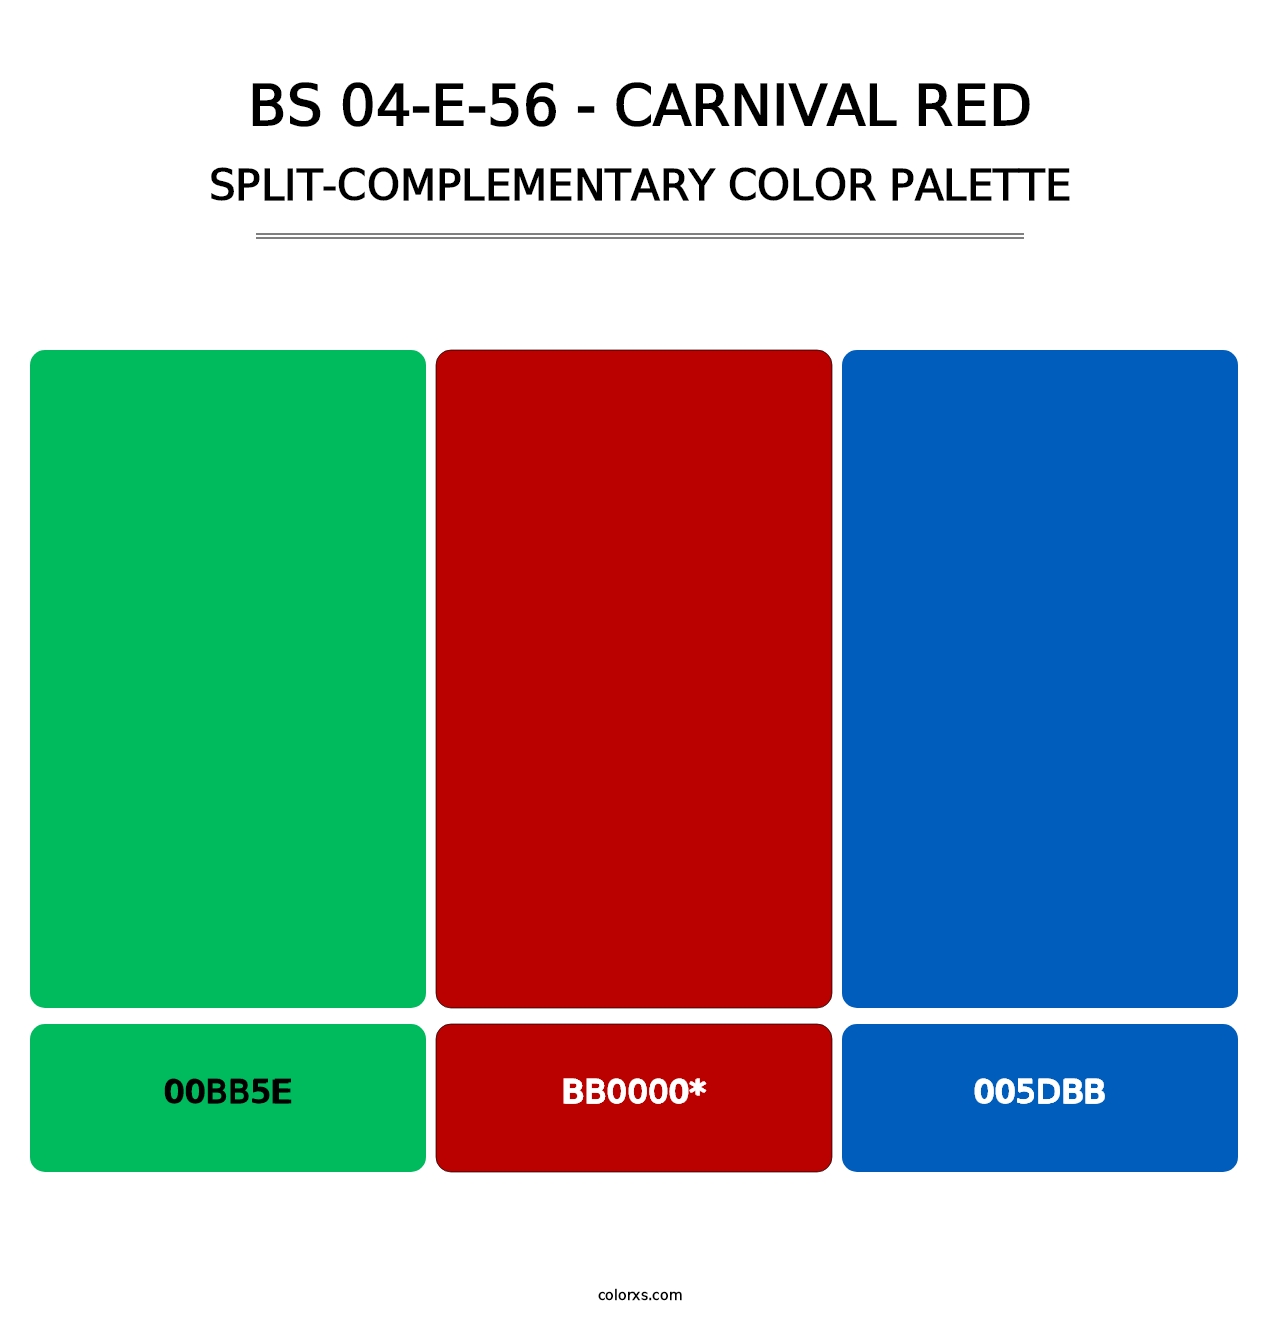 BS 04-E-56 - Carnival Red - Split-Complementary Color Palette